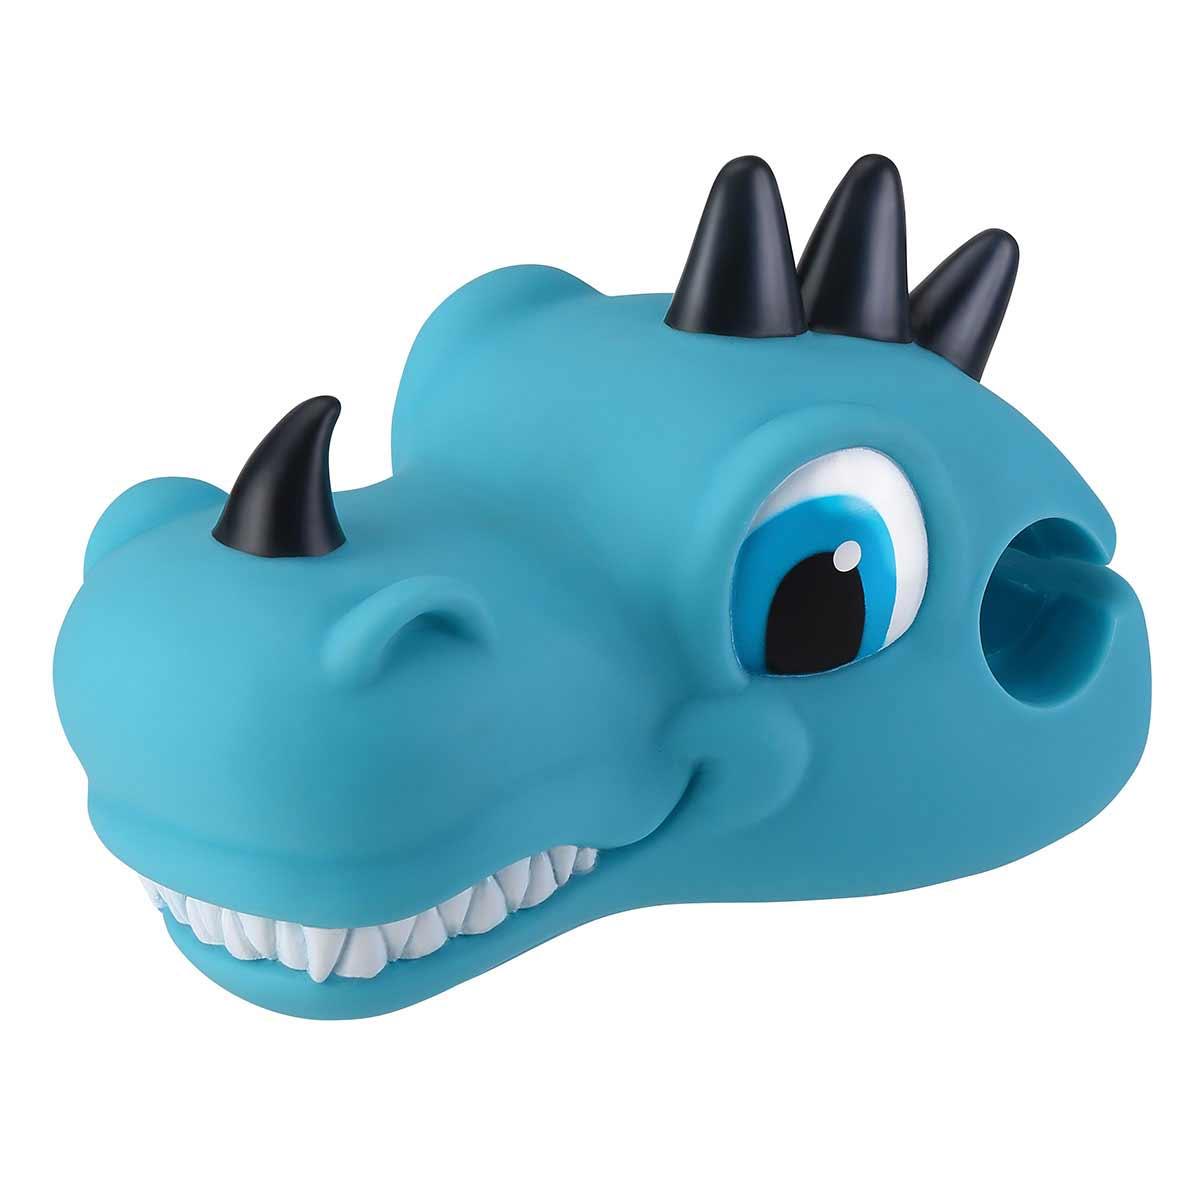 Scooter Friends - Scooter Handlebar Accessory - Blue dino - MoonyBoon